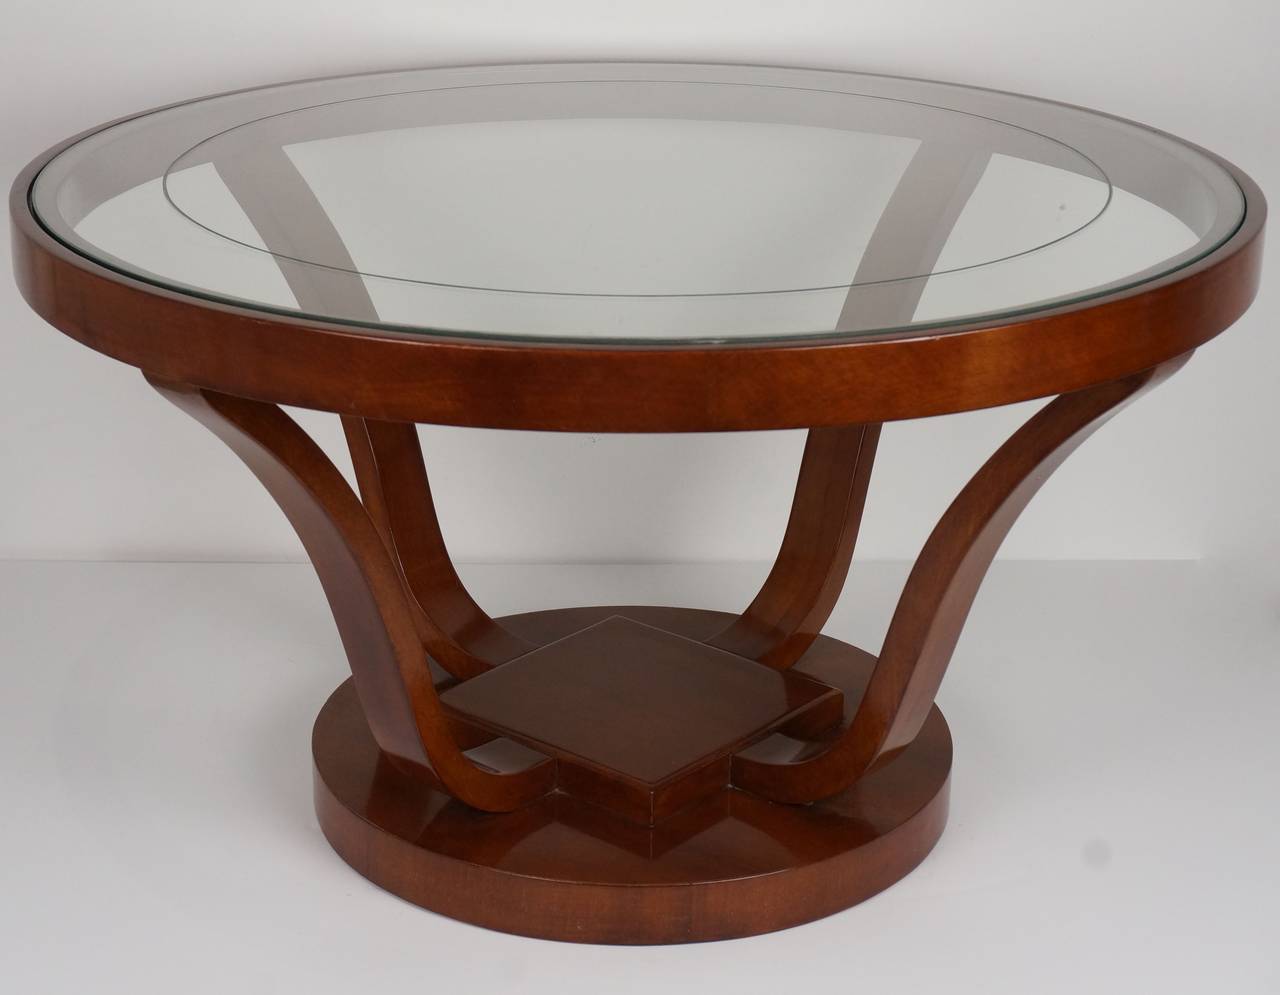 Mahogany Art Deco Style Round Cocktail or Coffee Table by Brown Saltman of California